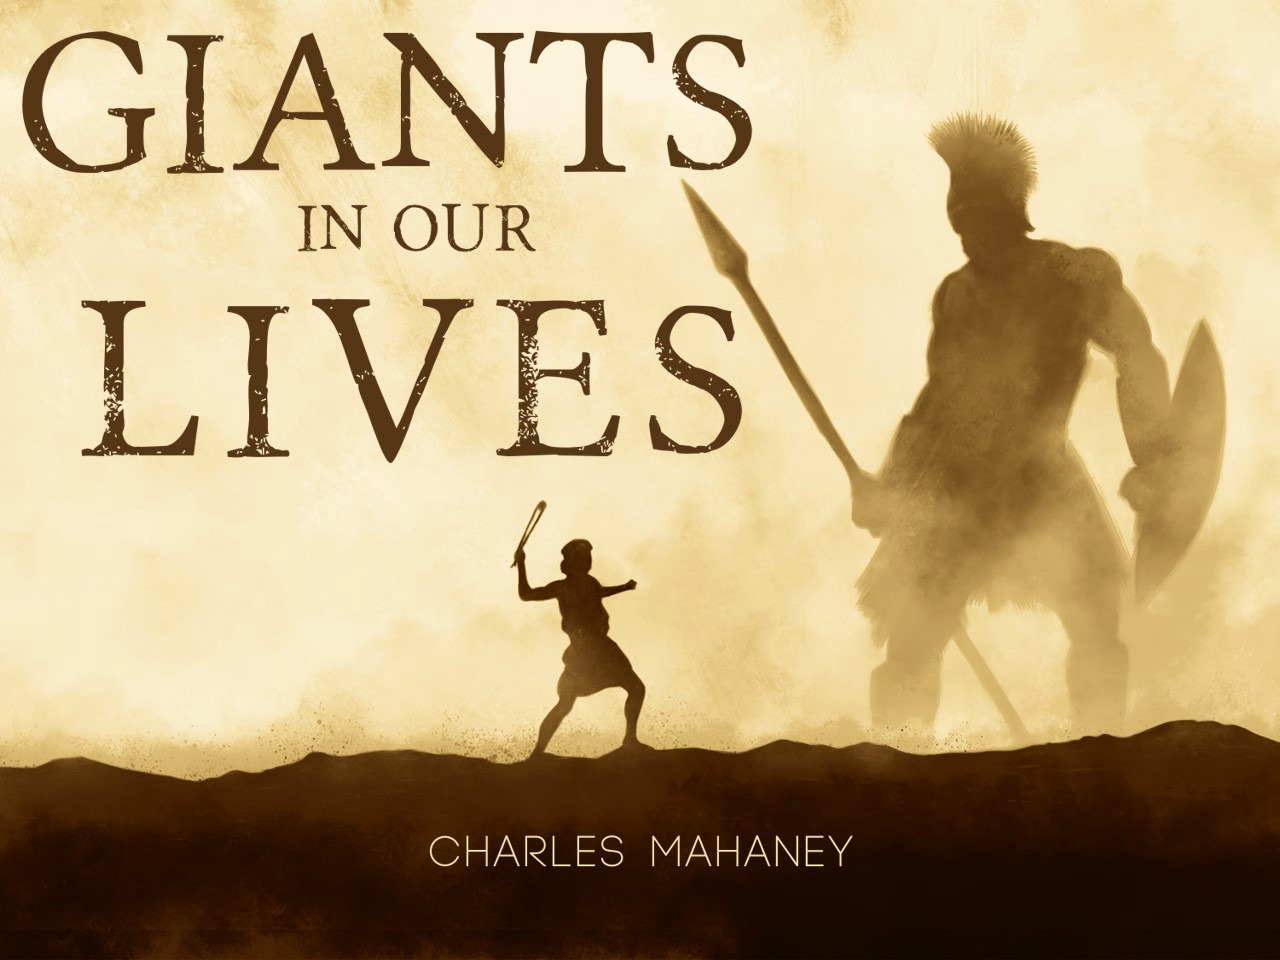 Giants in Our Lives – APOSTOLIC INFORMATION SERVICE